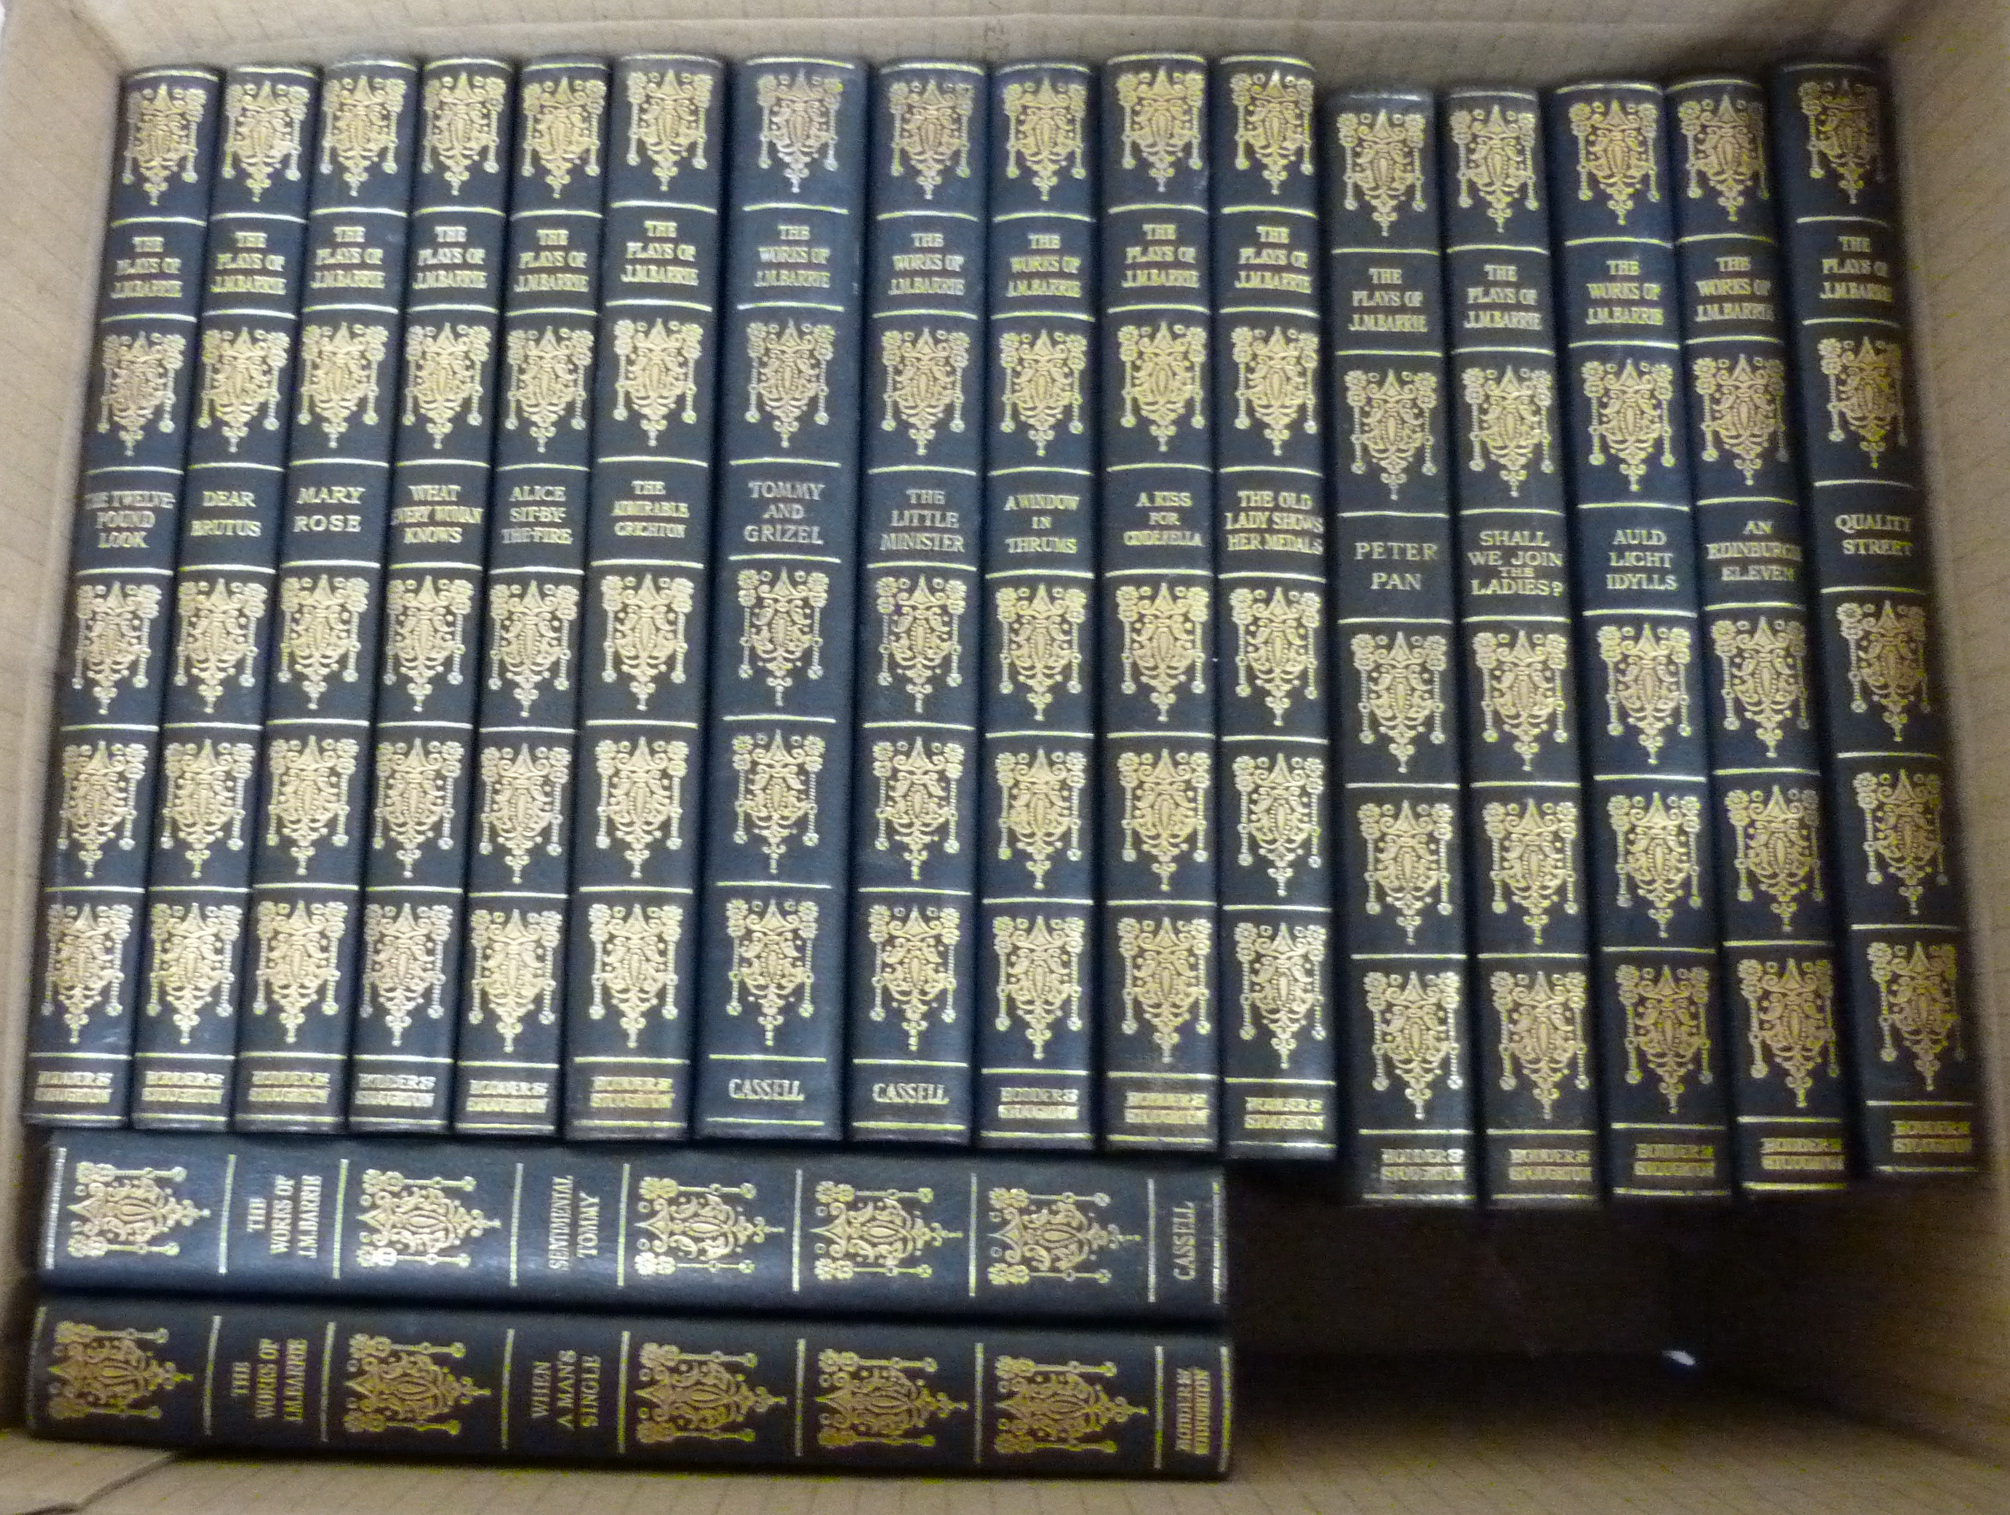 BARRIE J. M.  The Uniform Edition of the Works. 21 vols. Limp leather, gilt backs. 1928-1930. - Image 2 of 2